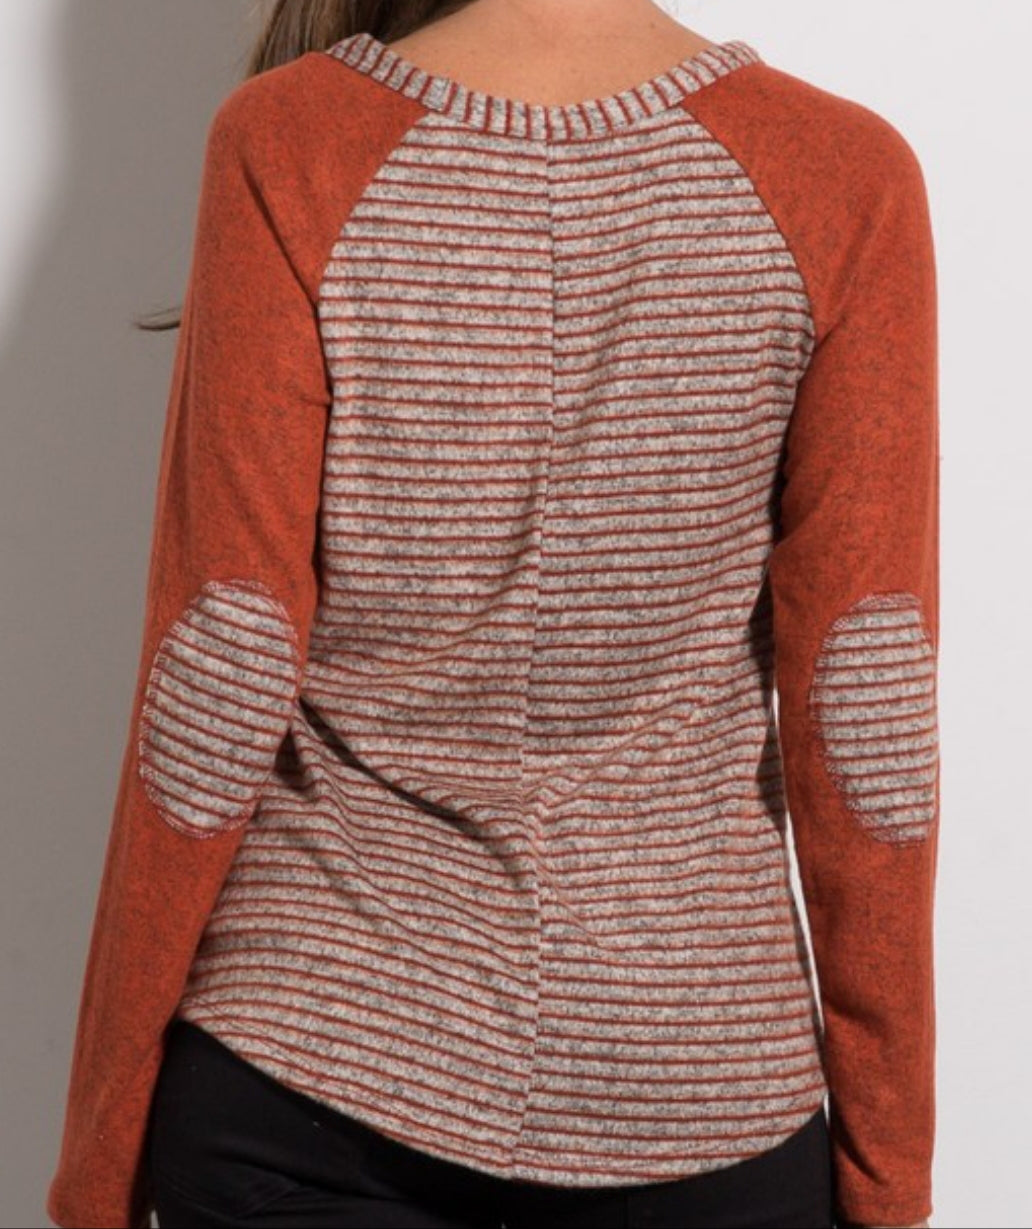 Rusted Striped Top - Payton's Online Boutique